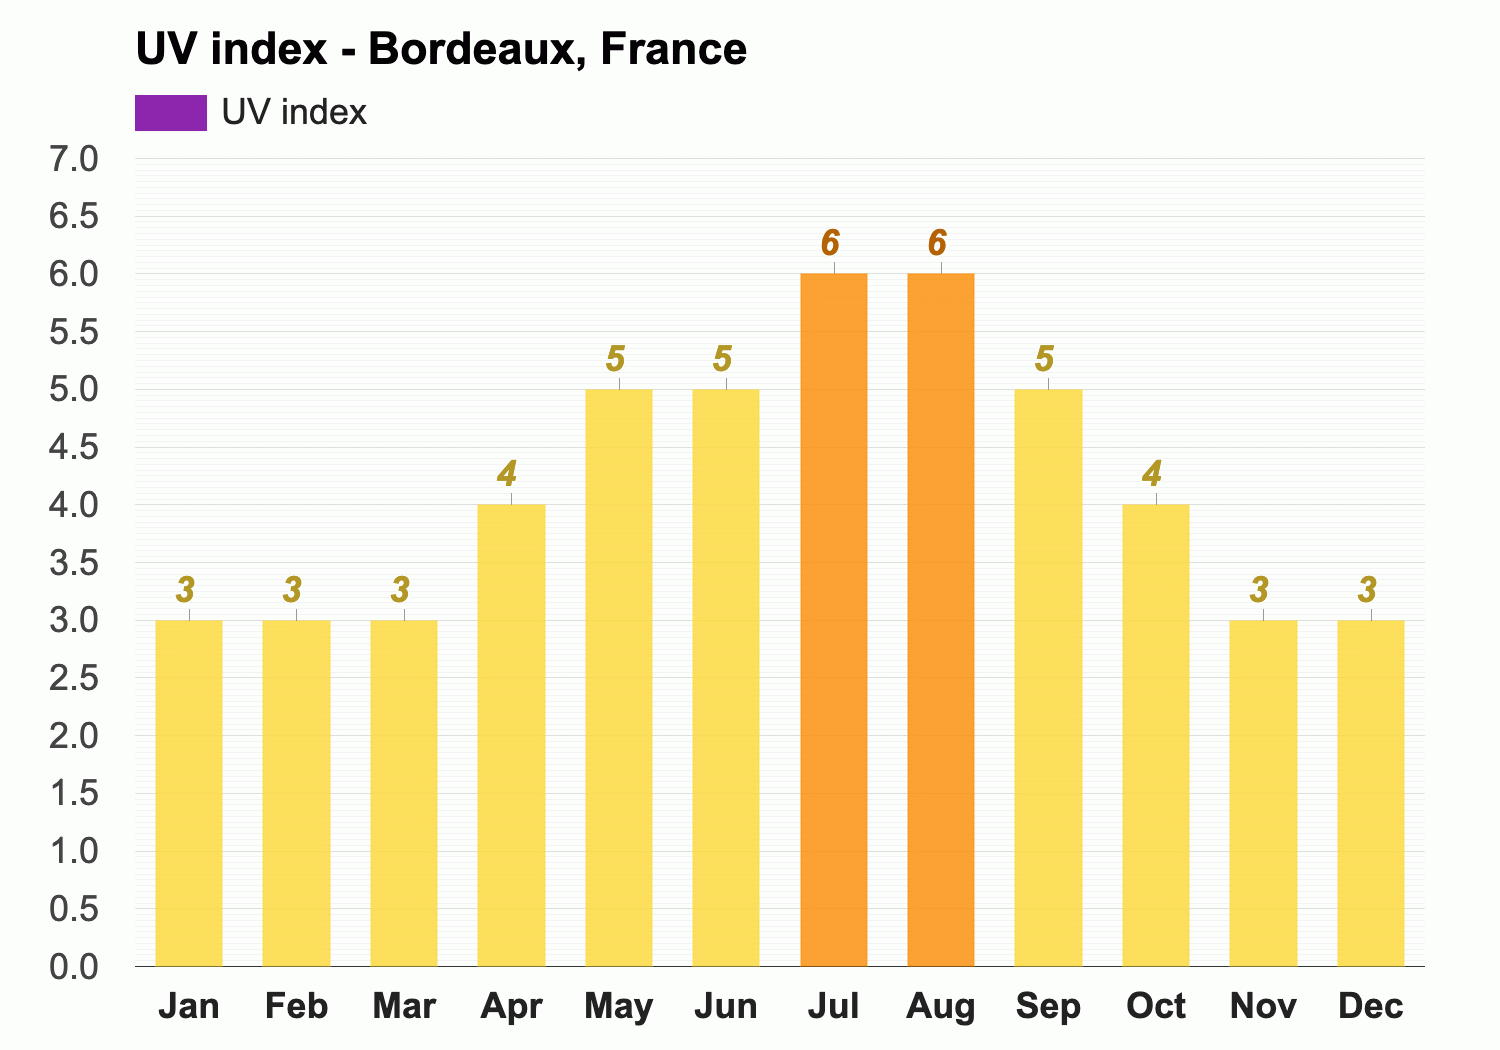 Bordeaux, France - November weather forecast and climate information |  Weather Atlas